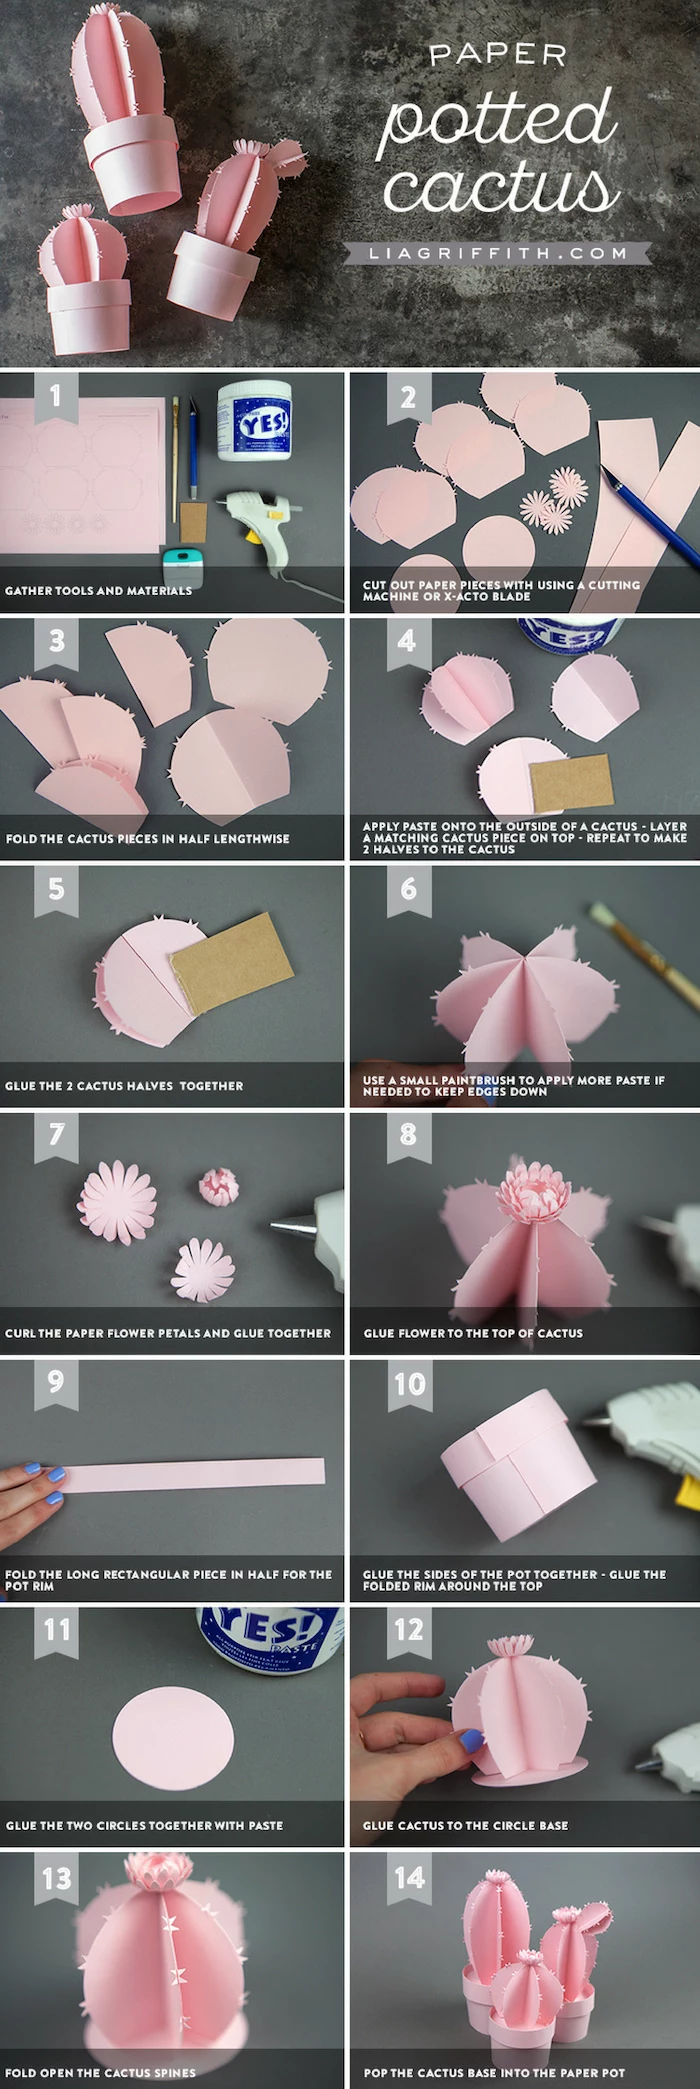 free paper flower templates, photo collage of step by step diy tutorial, how to make a potted cactus out of paper